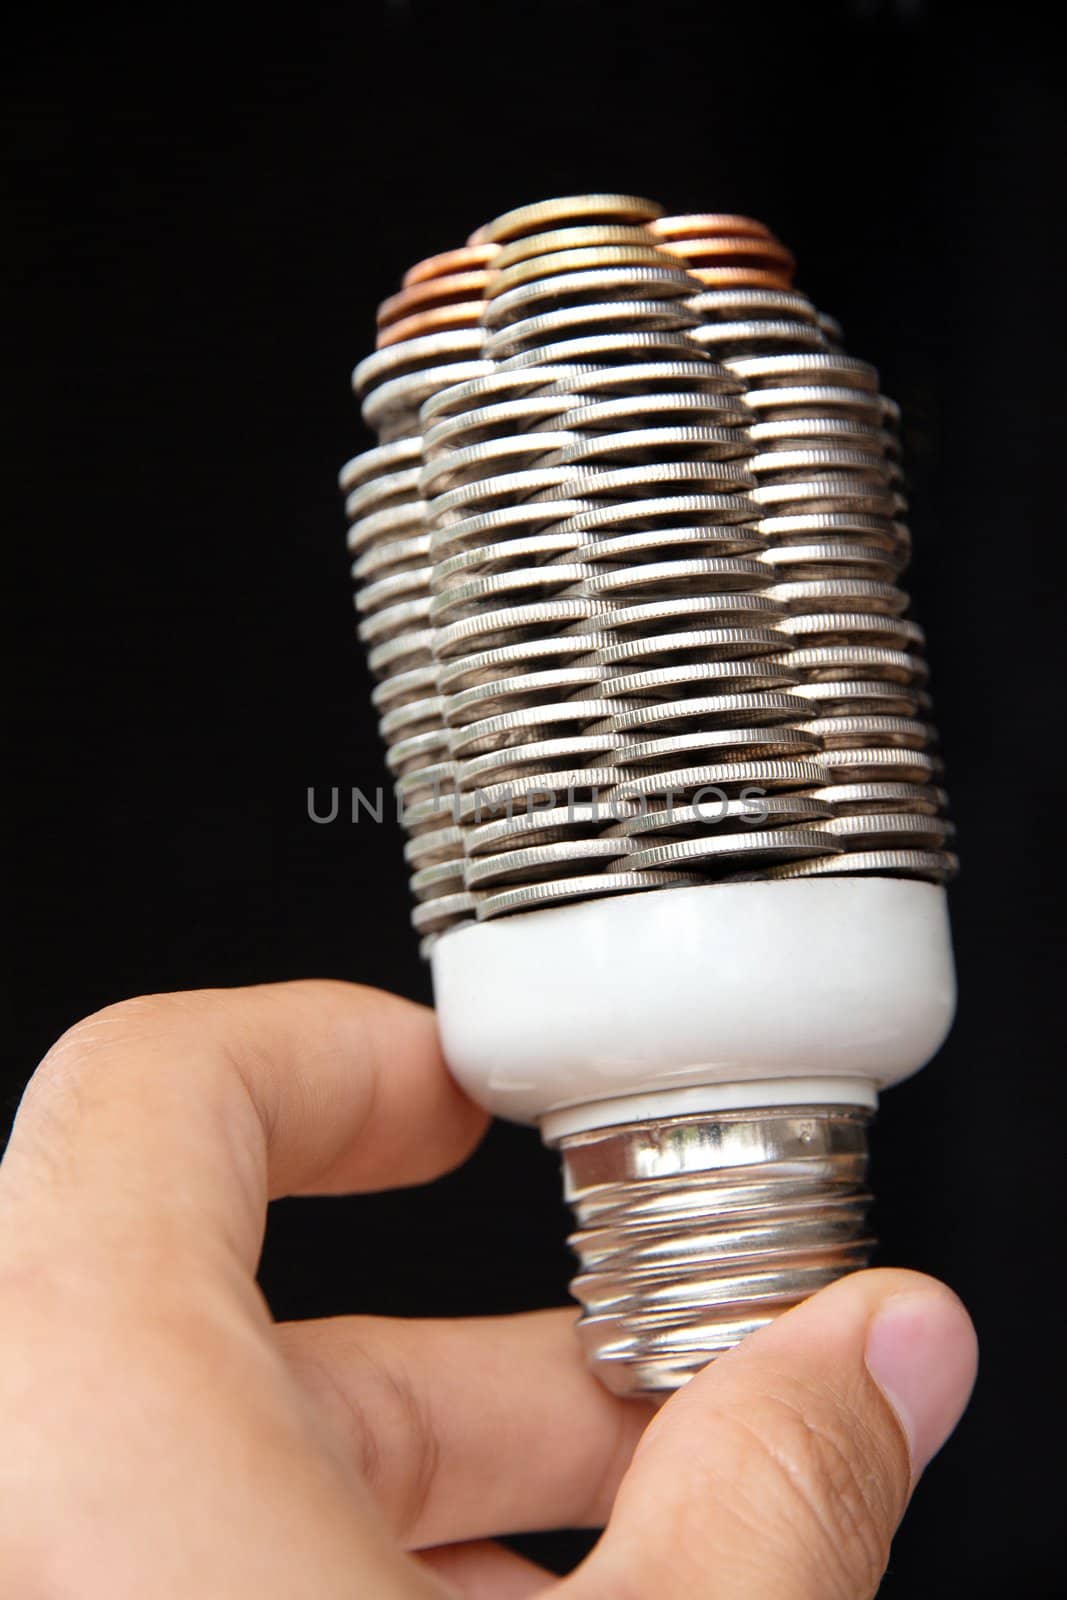 abstract image of coin light bulb